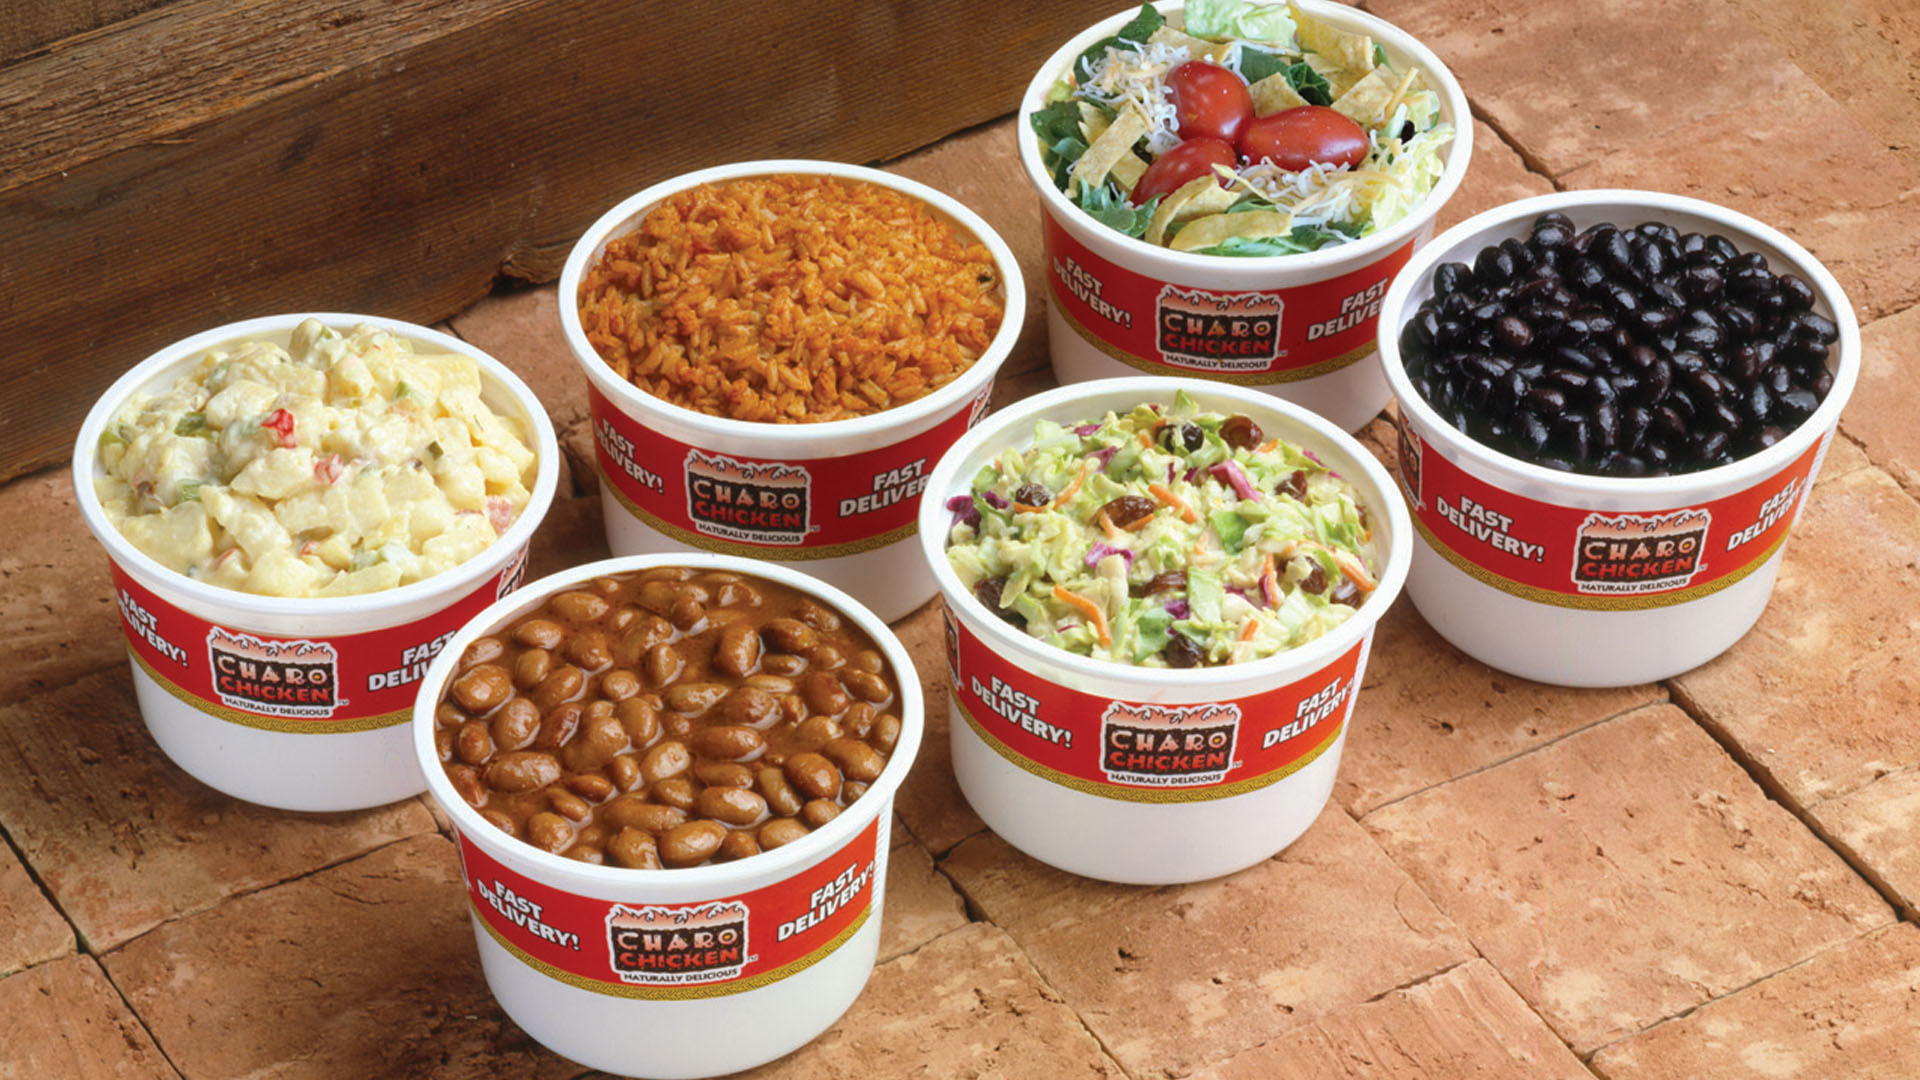 Image of Potato Salad, Charo Rice, Side Salad, Pinto Beans, Coleslaw, and Black Beans side dishes